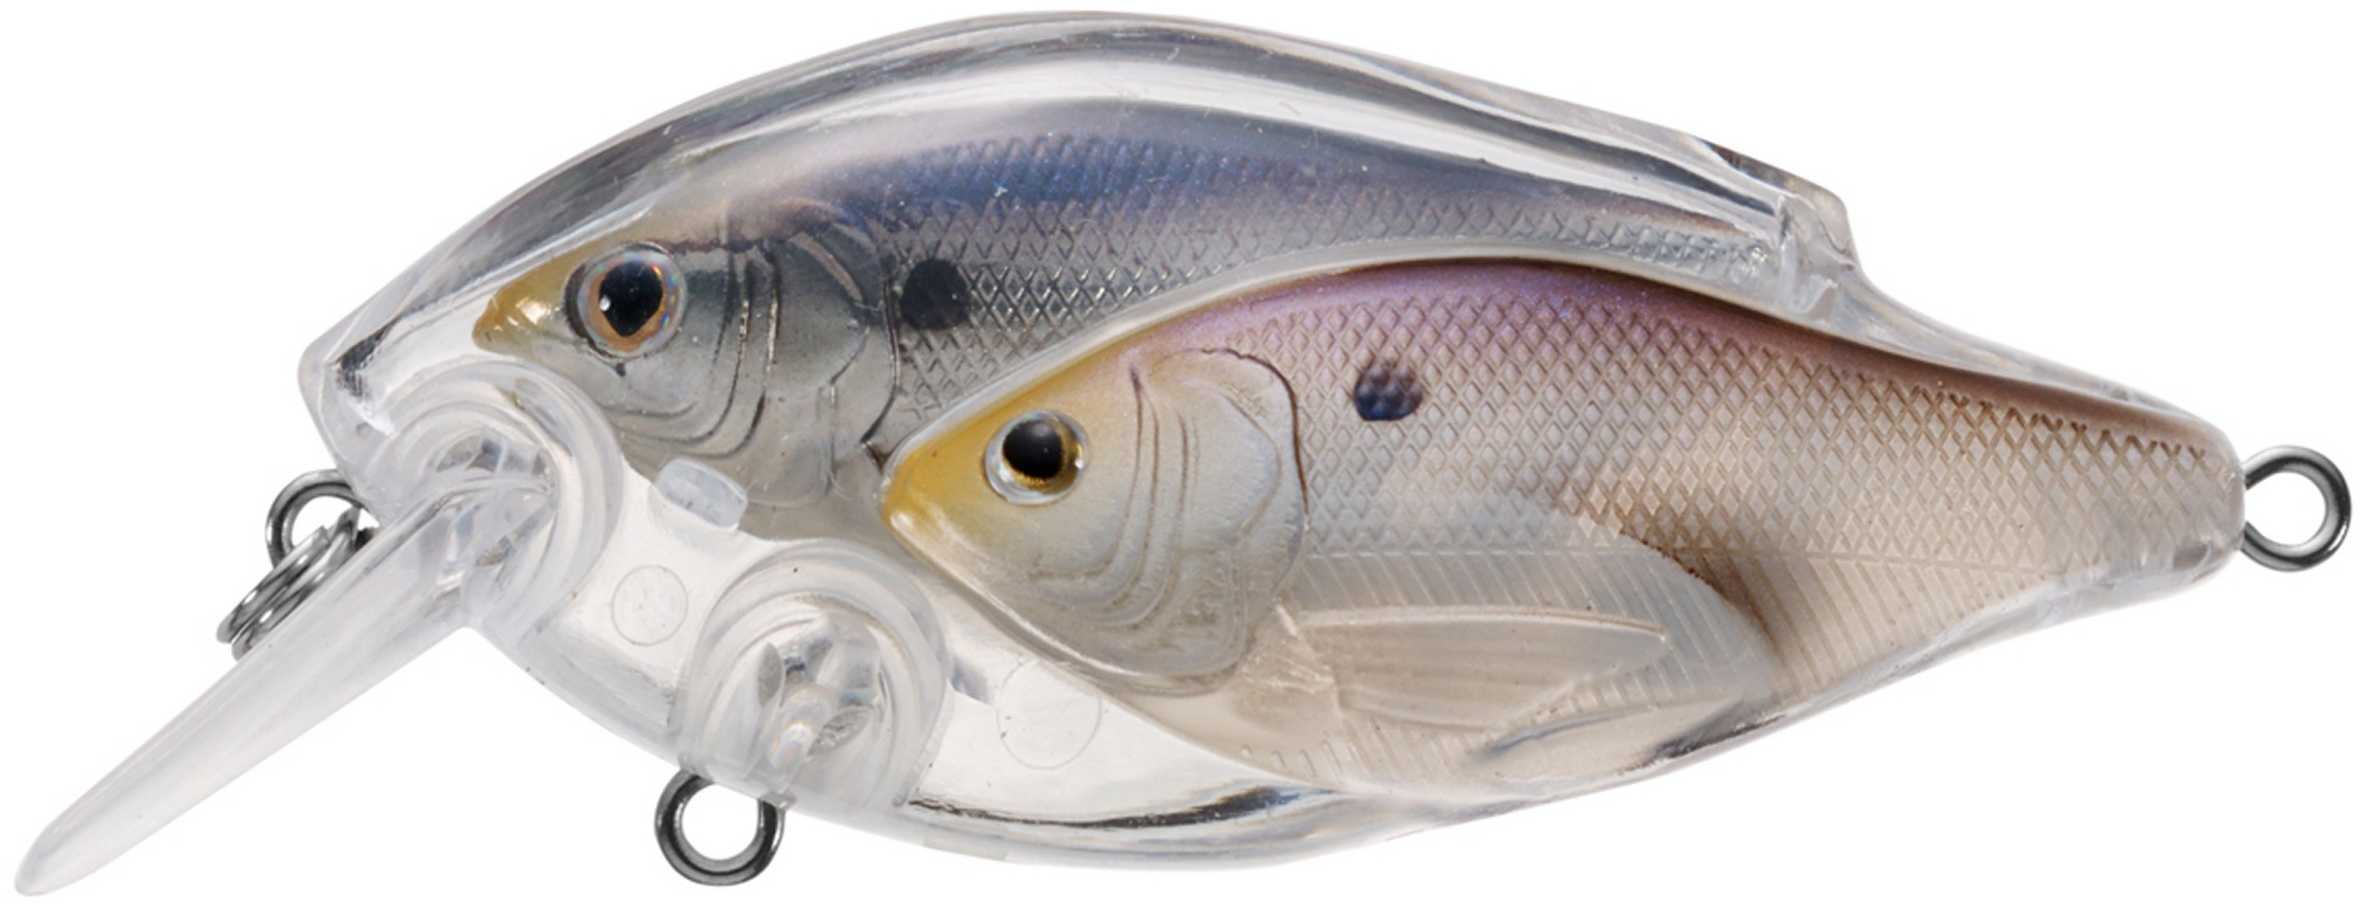 LIVETARGET Lures / Koppers Fishing and Tackle Corp Usa Baitball Threadfin Cb 1/2Oz 2 3/8In 3-5Ft Prl/Grey TSB60S-804